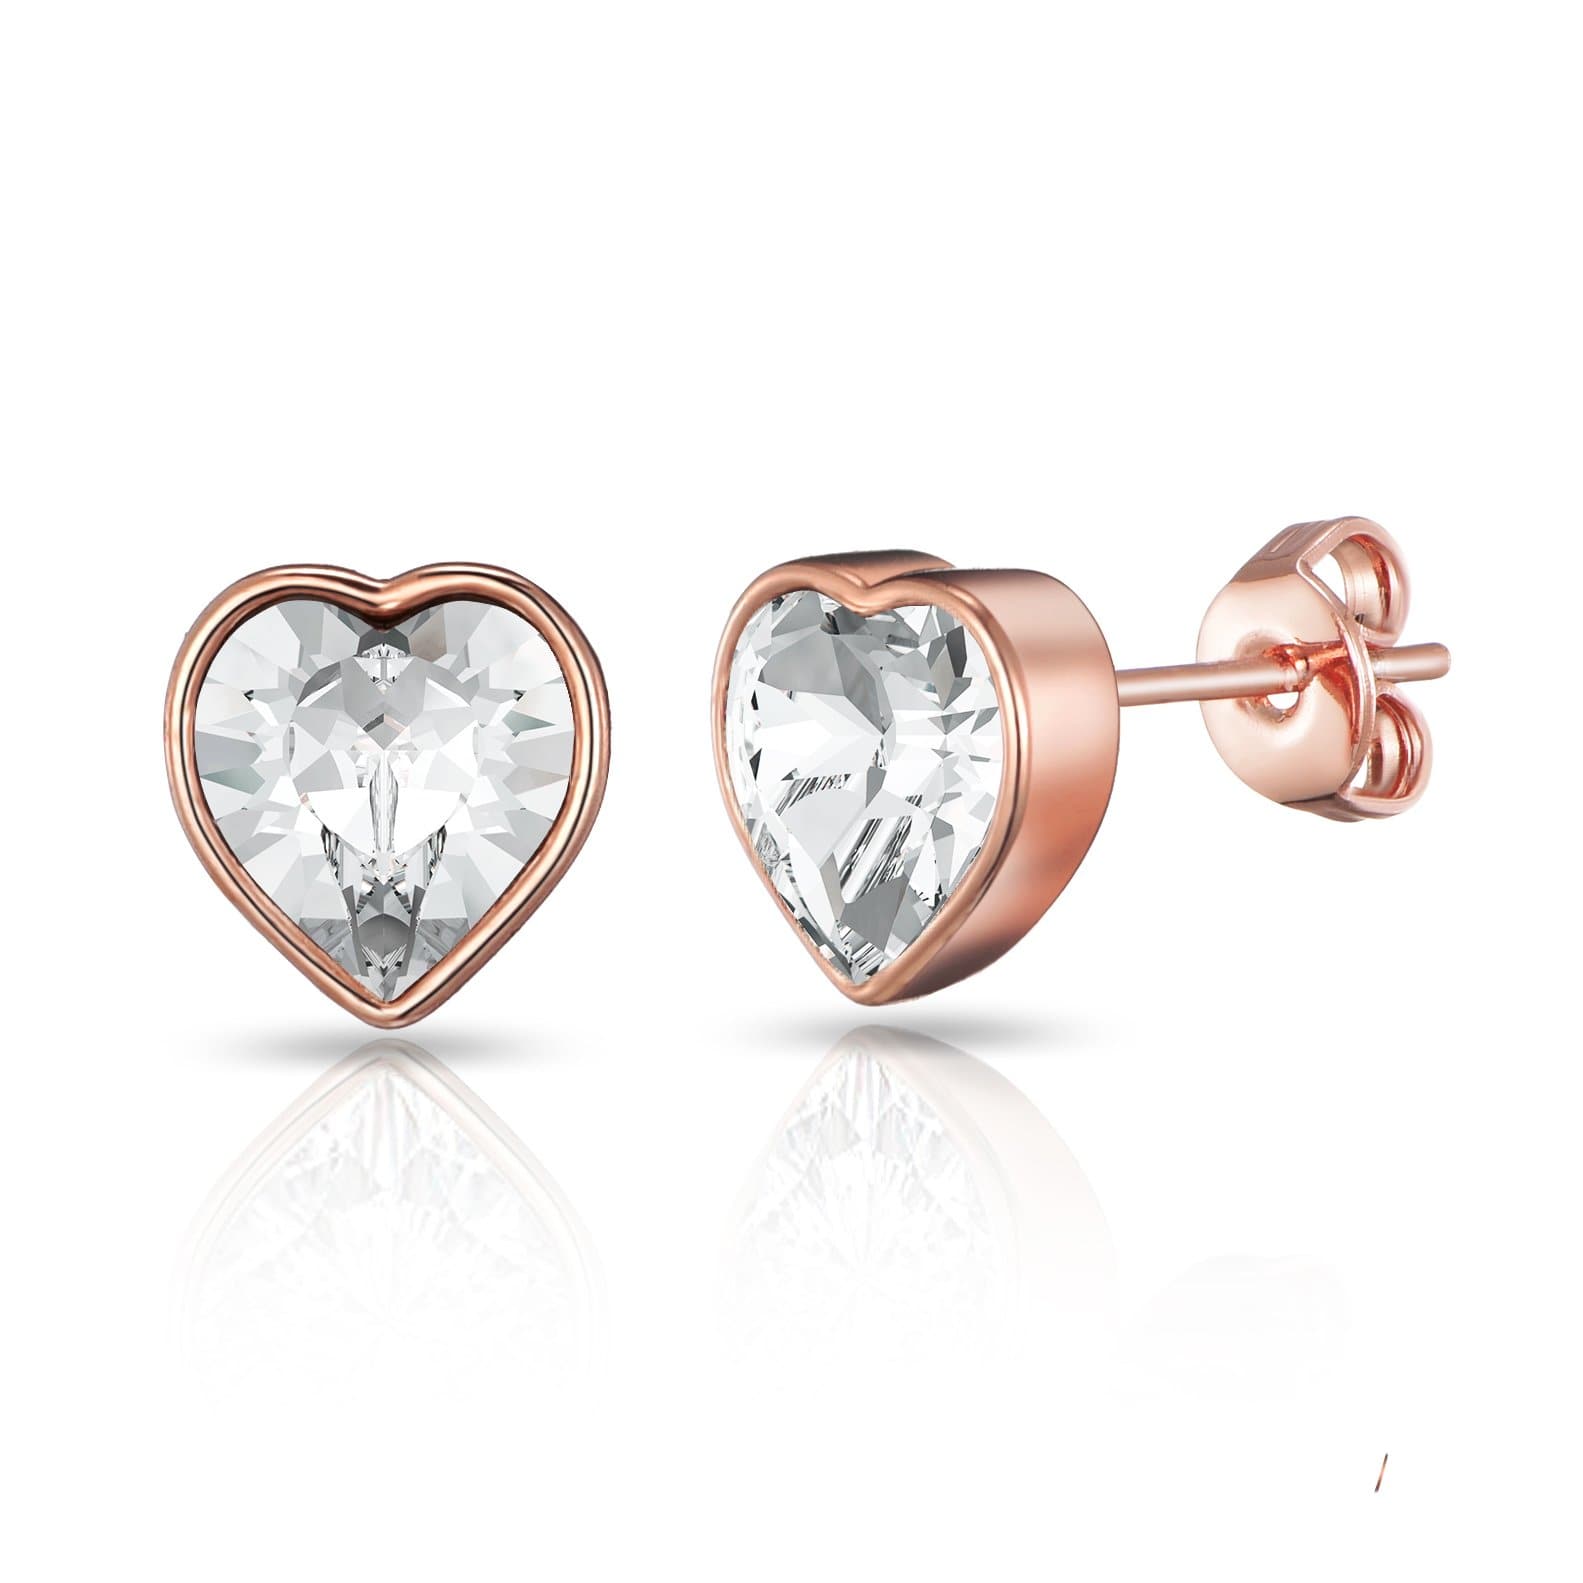 Rose Gold Plated Bezel set Heart Earrings Created with Zircondia® Crystals by Philip Jones Jewellery